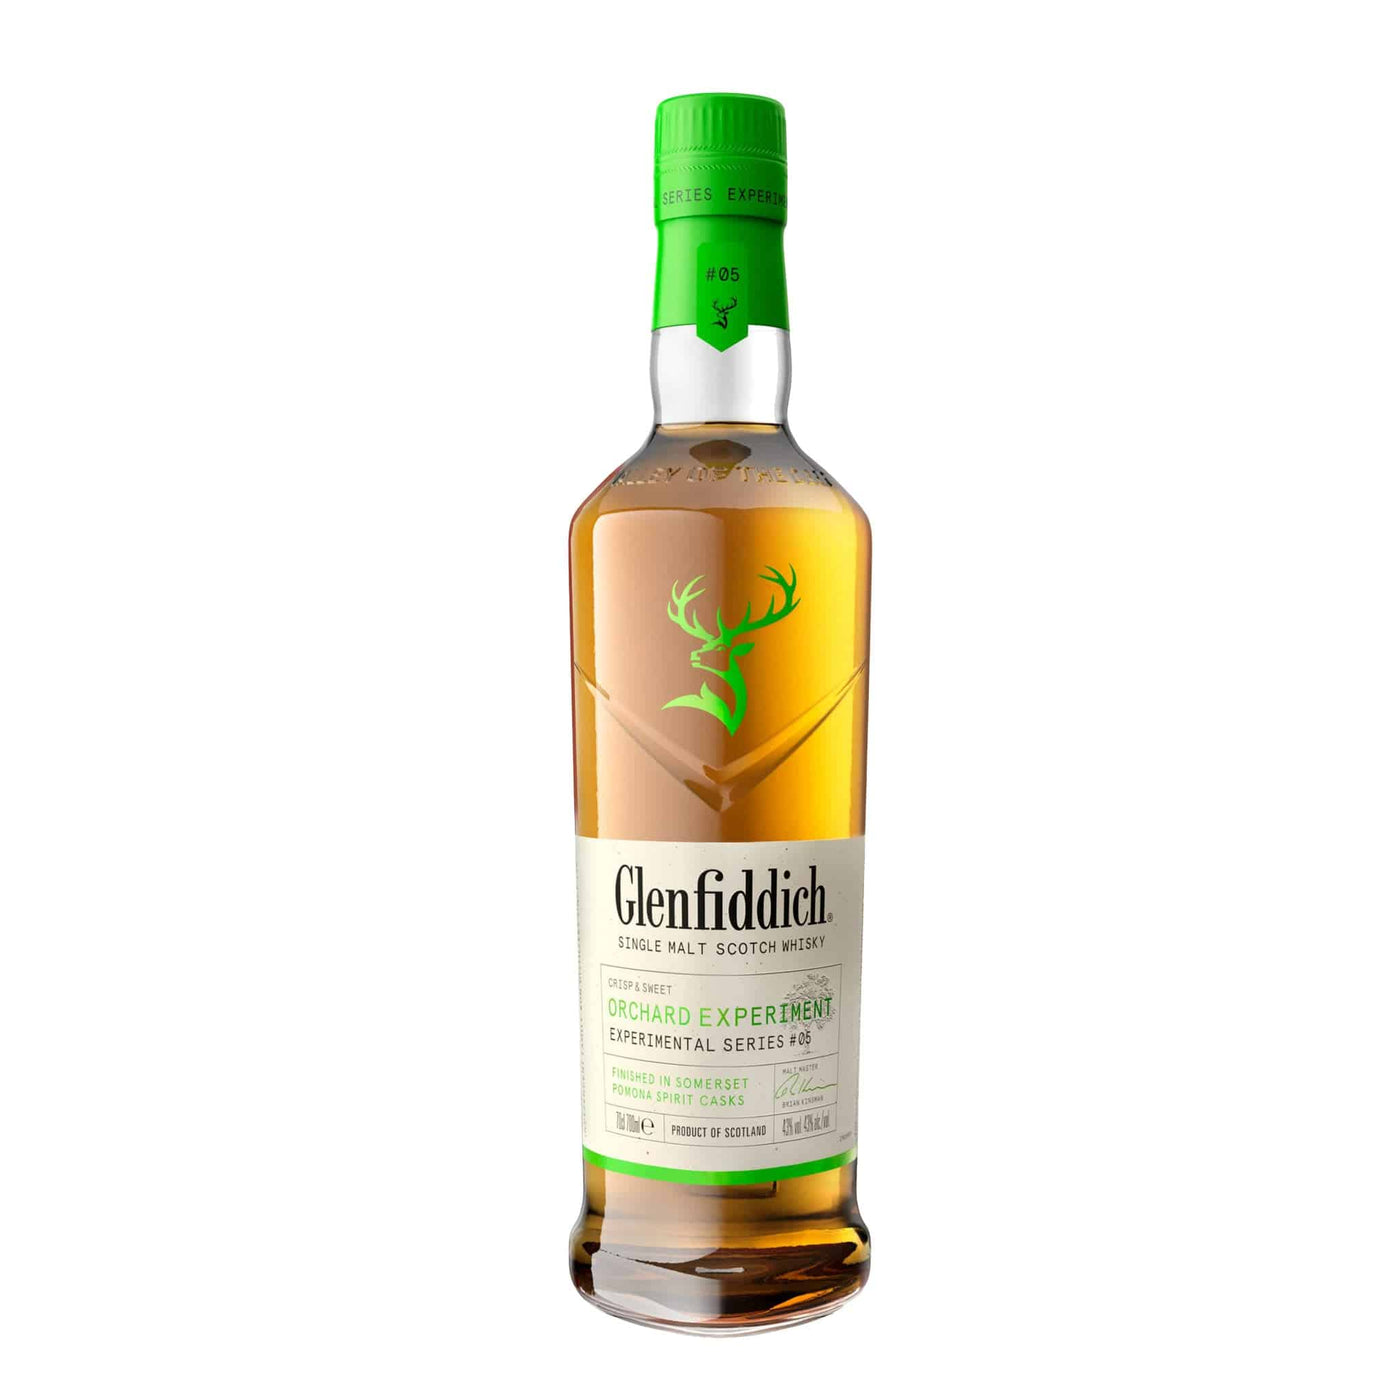 Glenfiddich Orchard Experiment Whisky - Spiritly